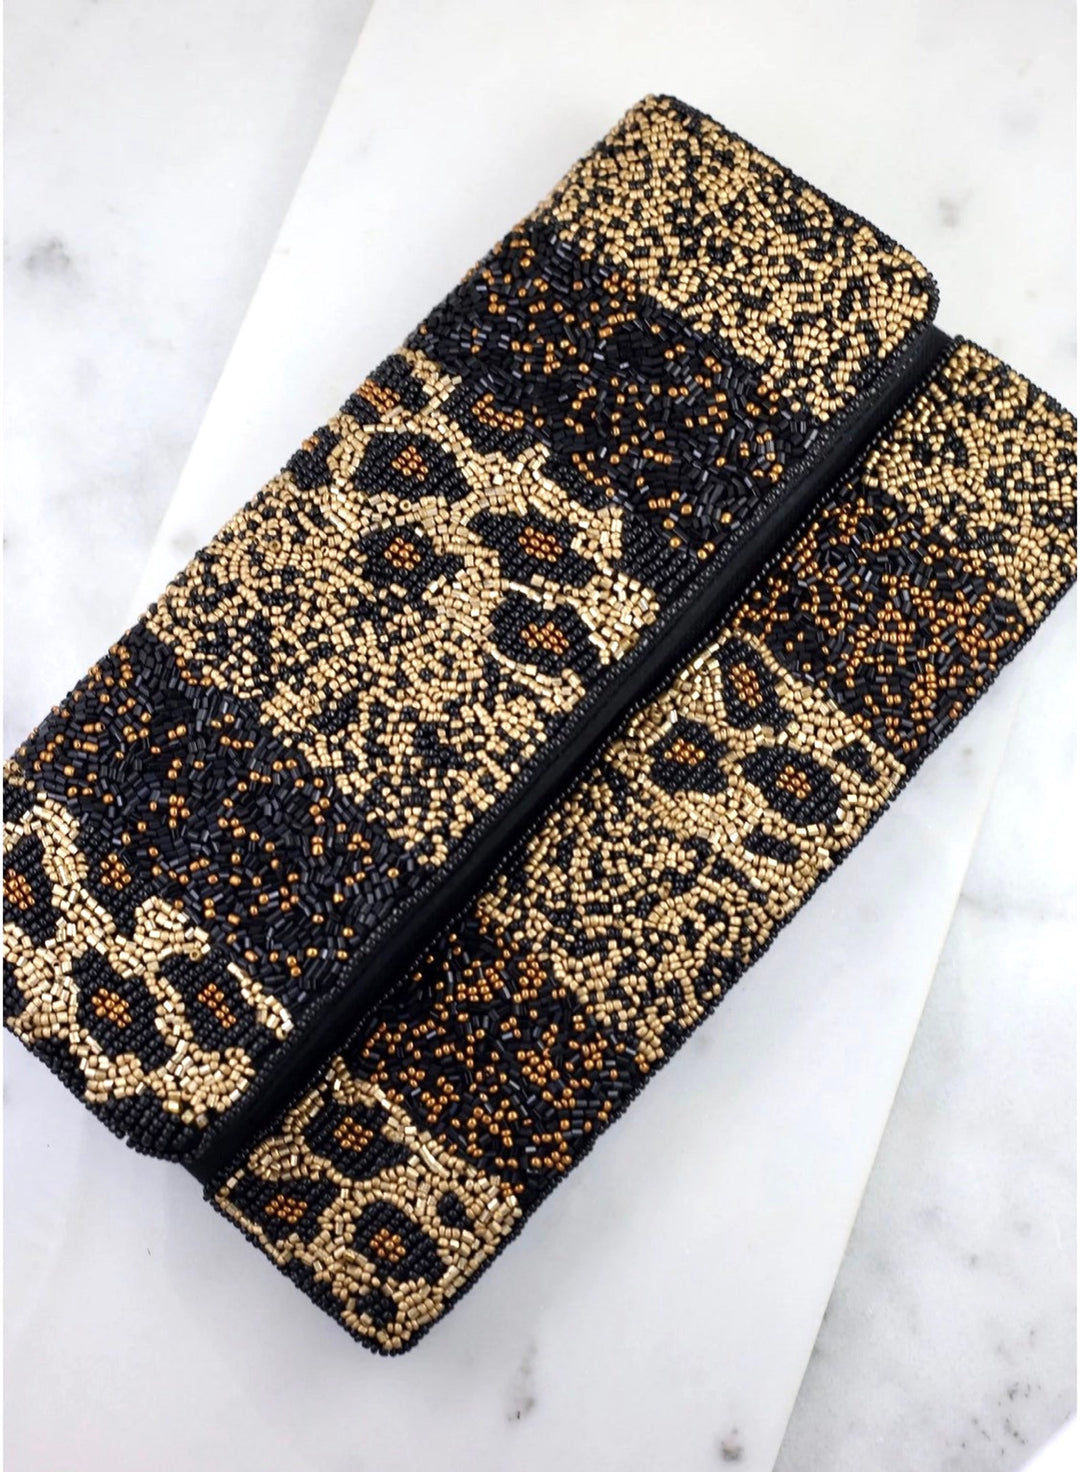 LEOPARD OMBRE BEADED CLUTCH - Kingfisher Road - Online Boutique